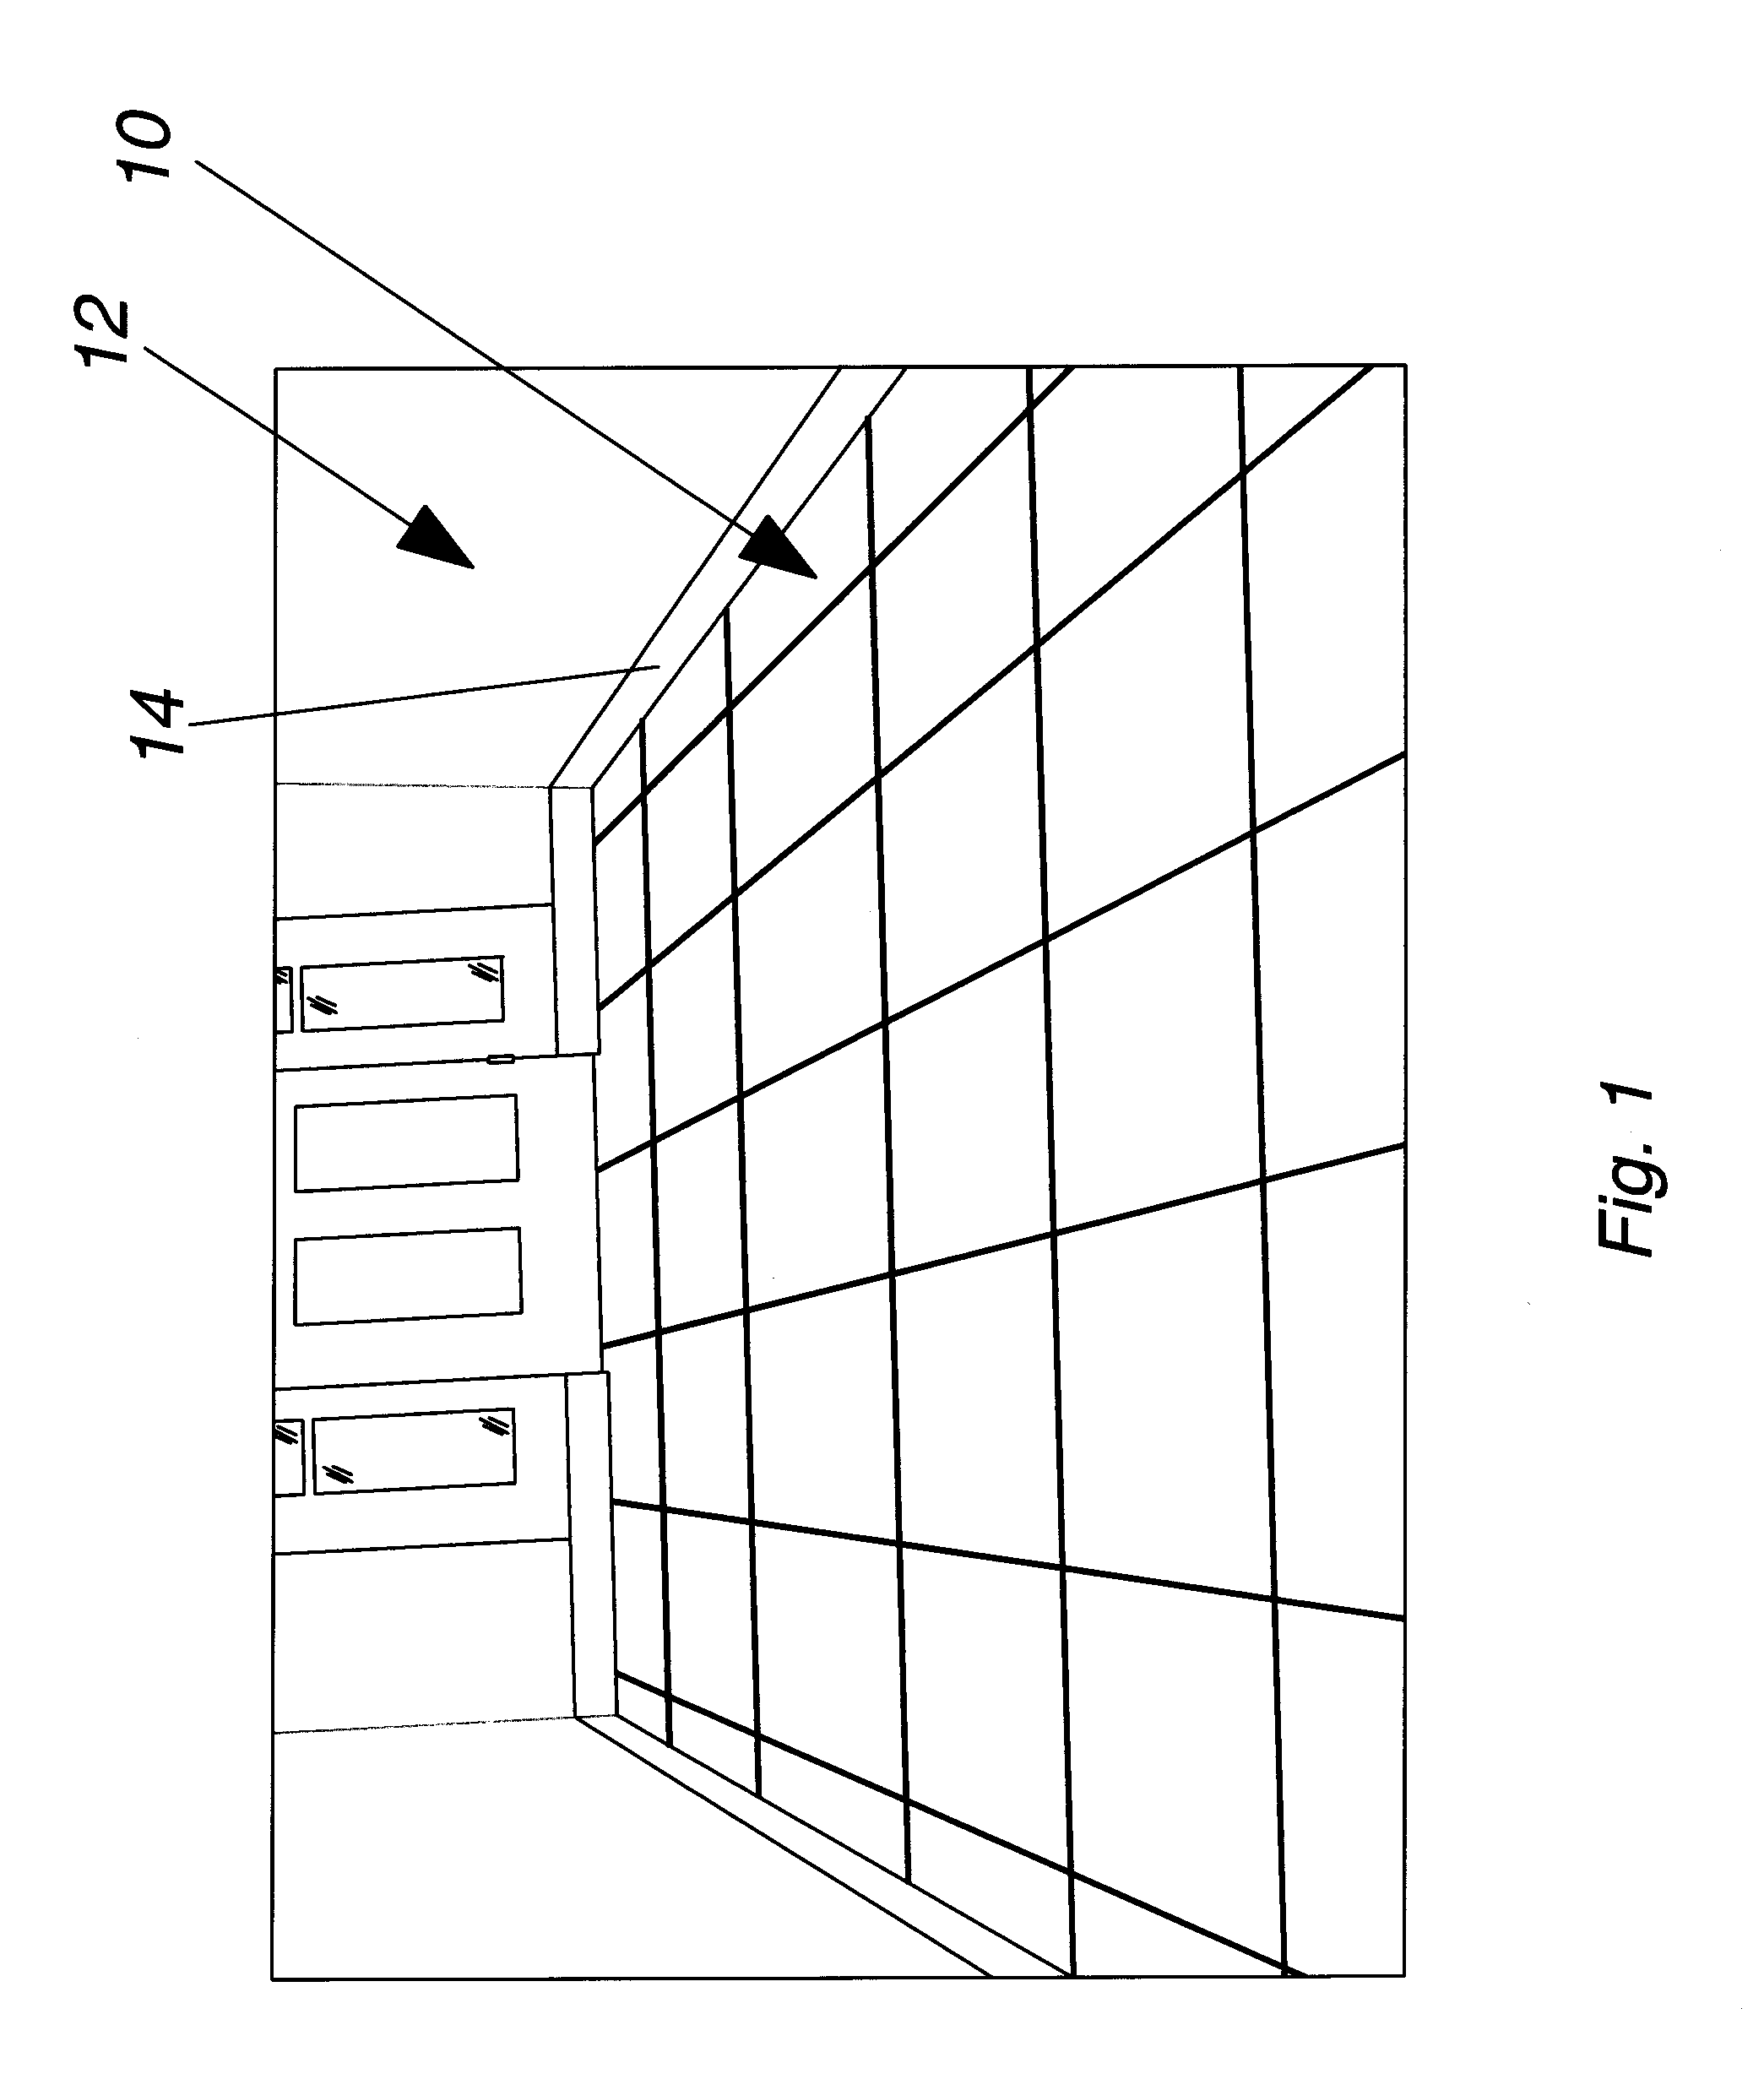 Decorative monolithic, functionally bonded composite surface overlayment system and application process